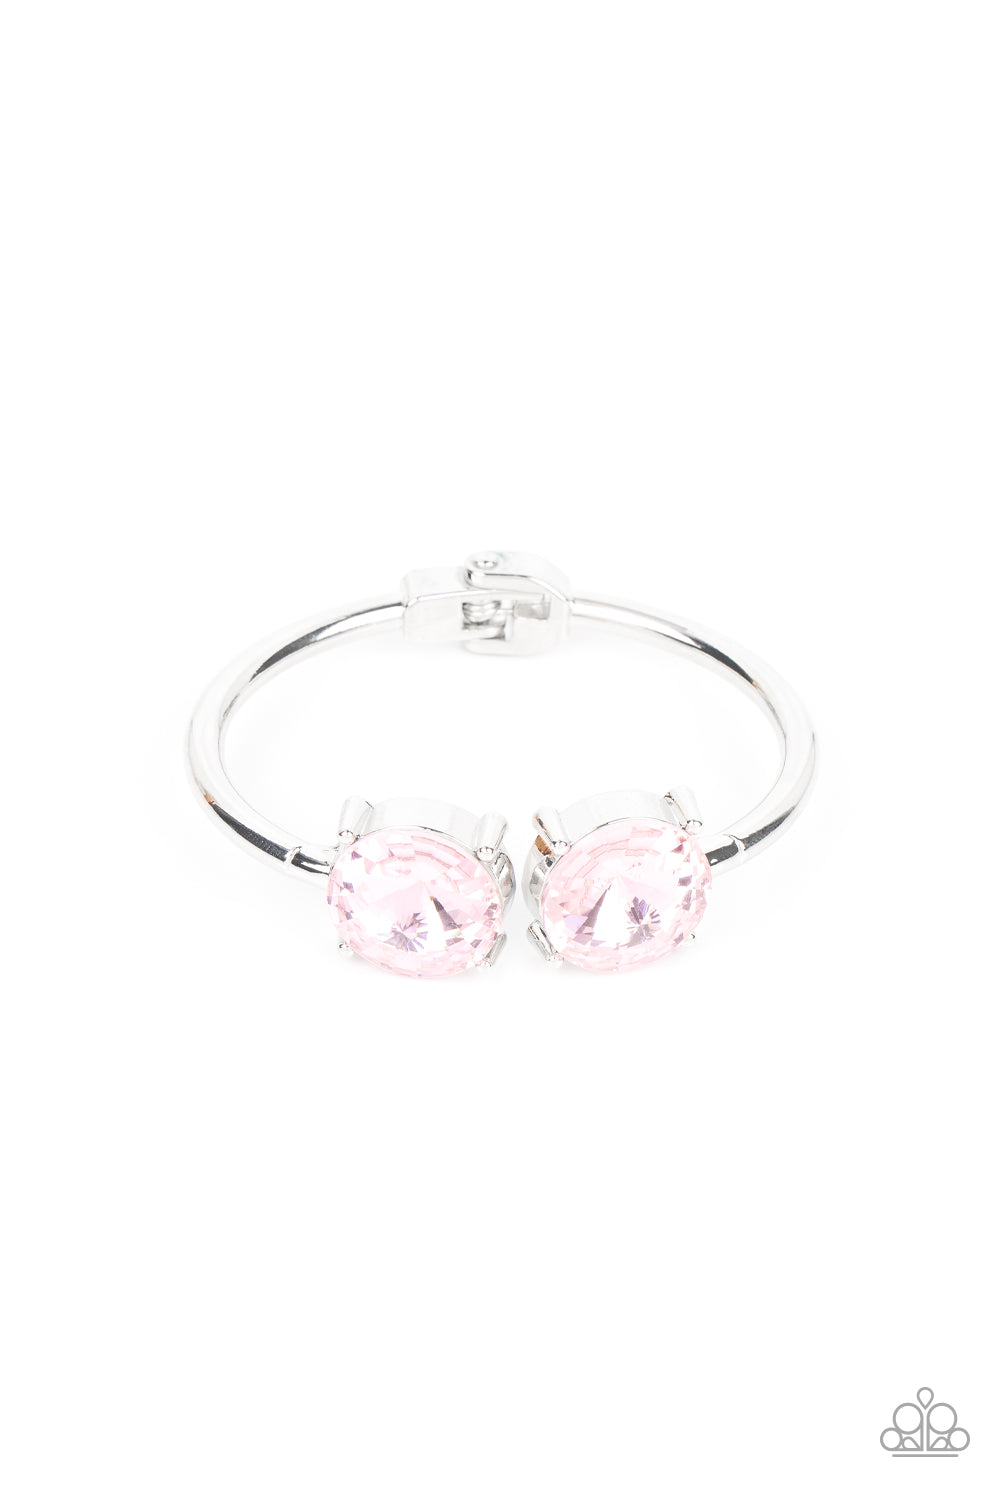 Spark and Sizzle Pink Hinge Bracelet - Paparazzi Accessories  Two dramatically oversized pink rhinestones are nestled inside pronged silver fittings at the ends of a hinged silver cuff, creating a sparkly statement piece that wraps boldly around the wrist. Features a hinged closure.  Sold as one individual bracelet.